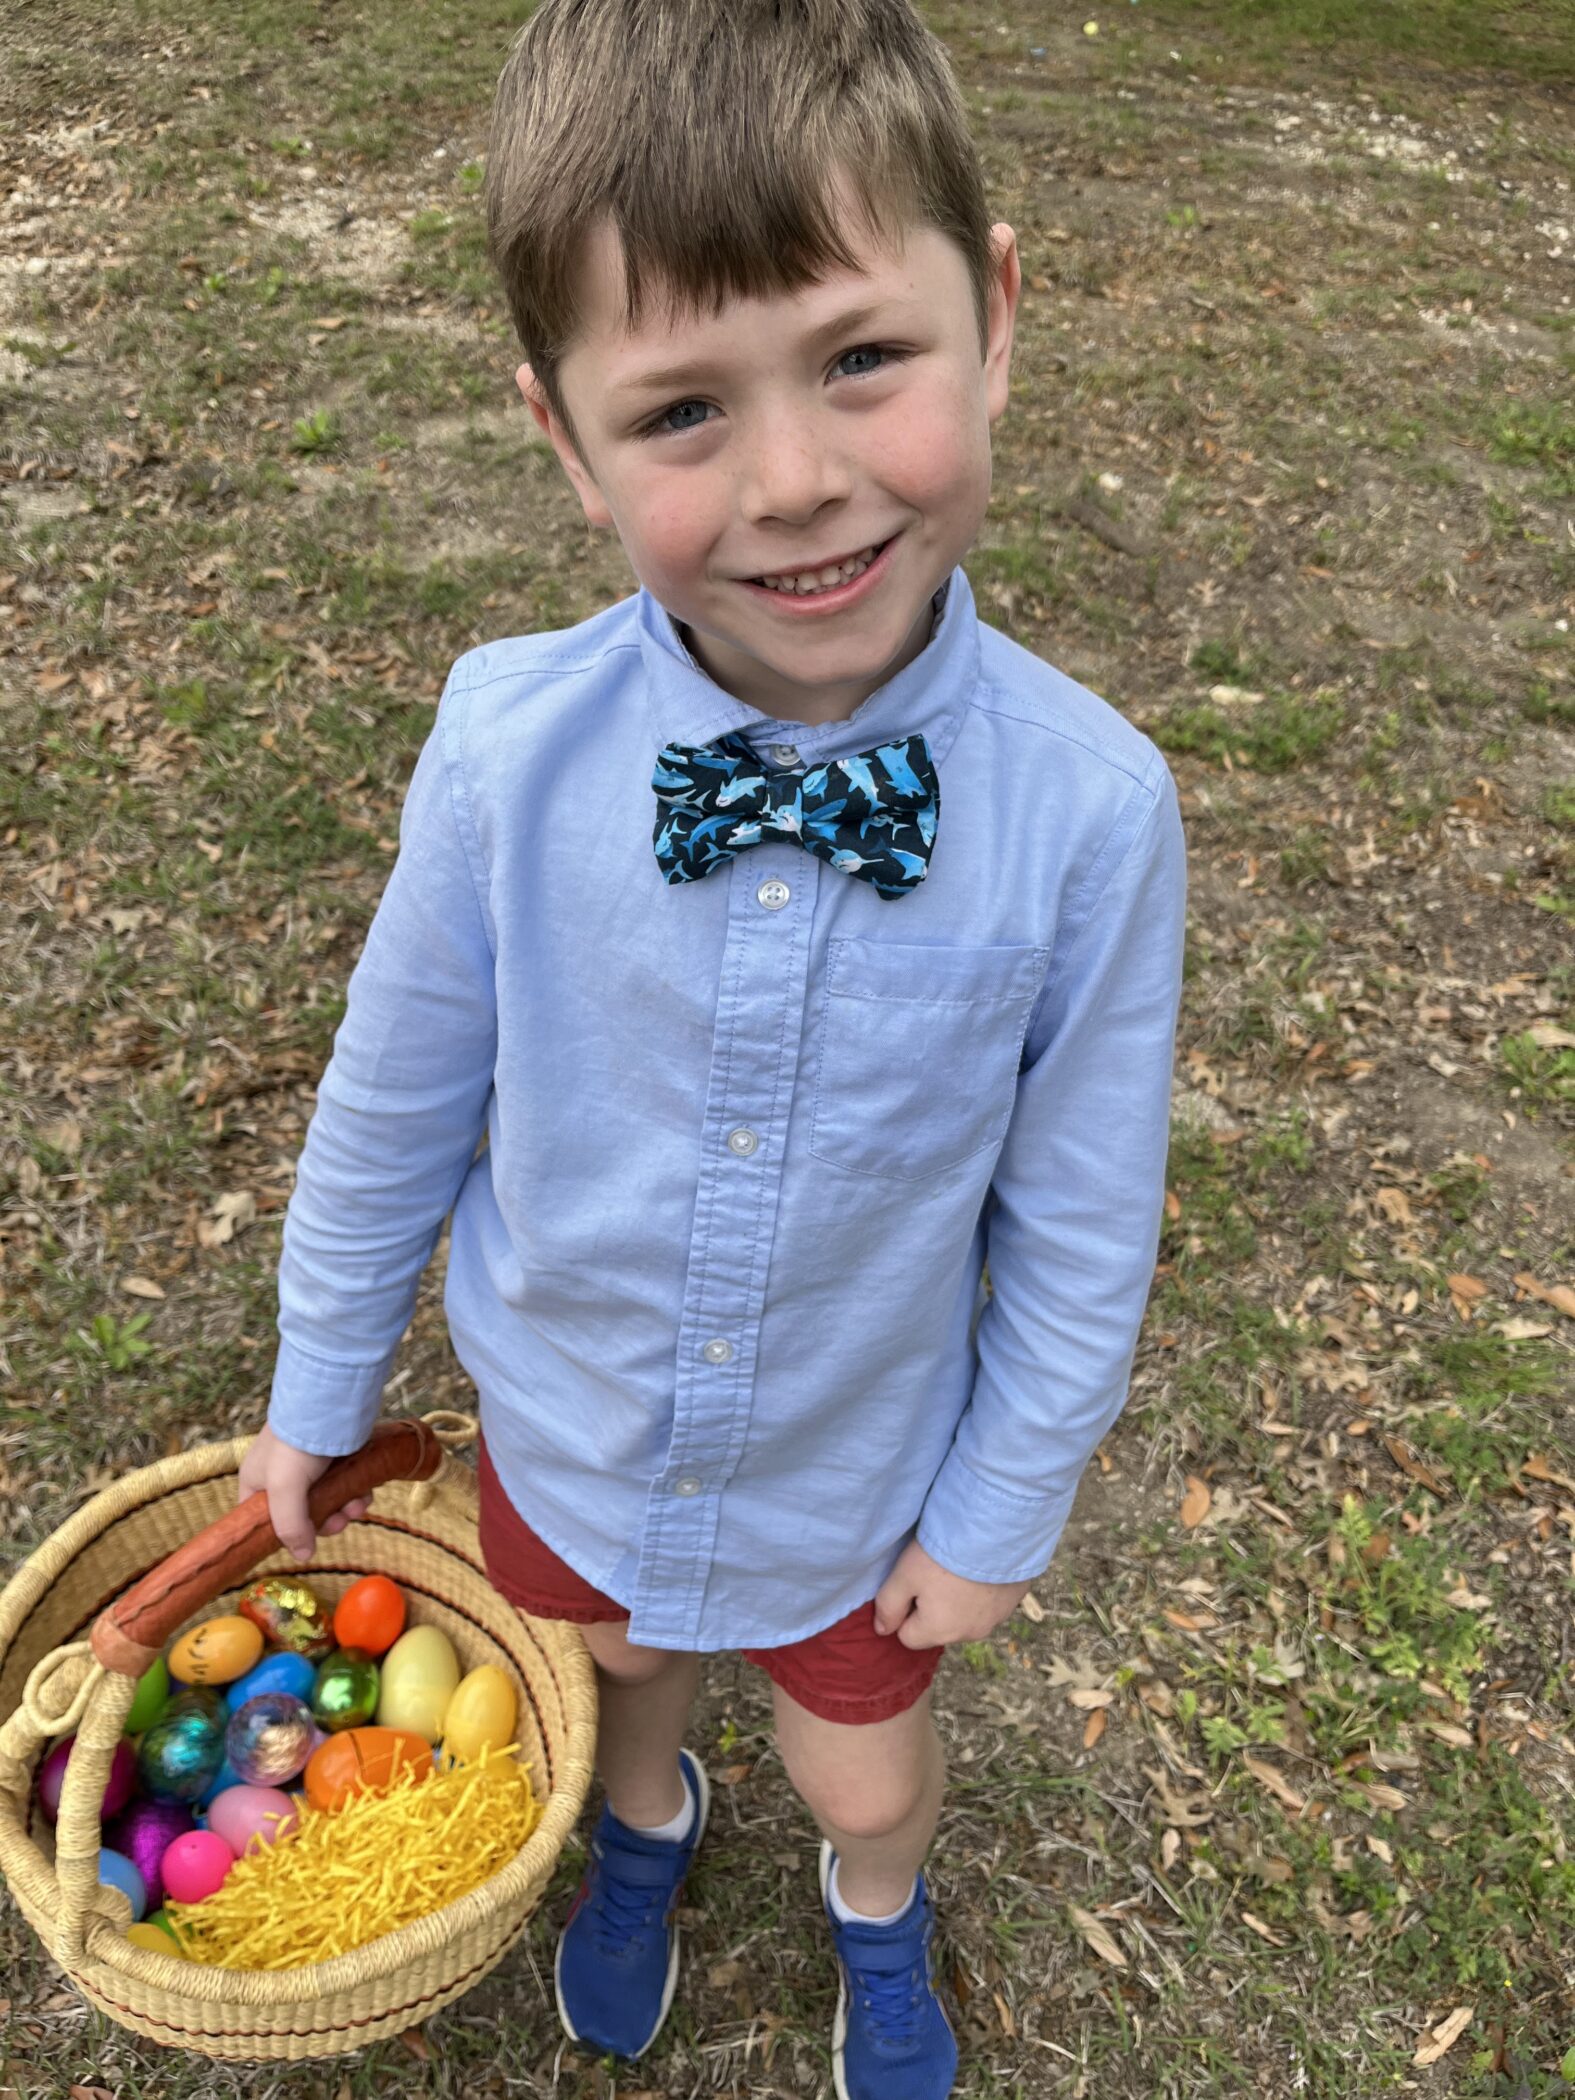 Levi Hackemack with an Easter basket.